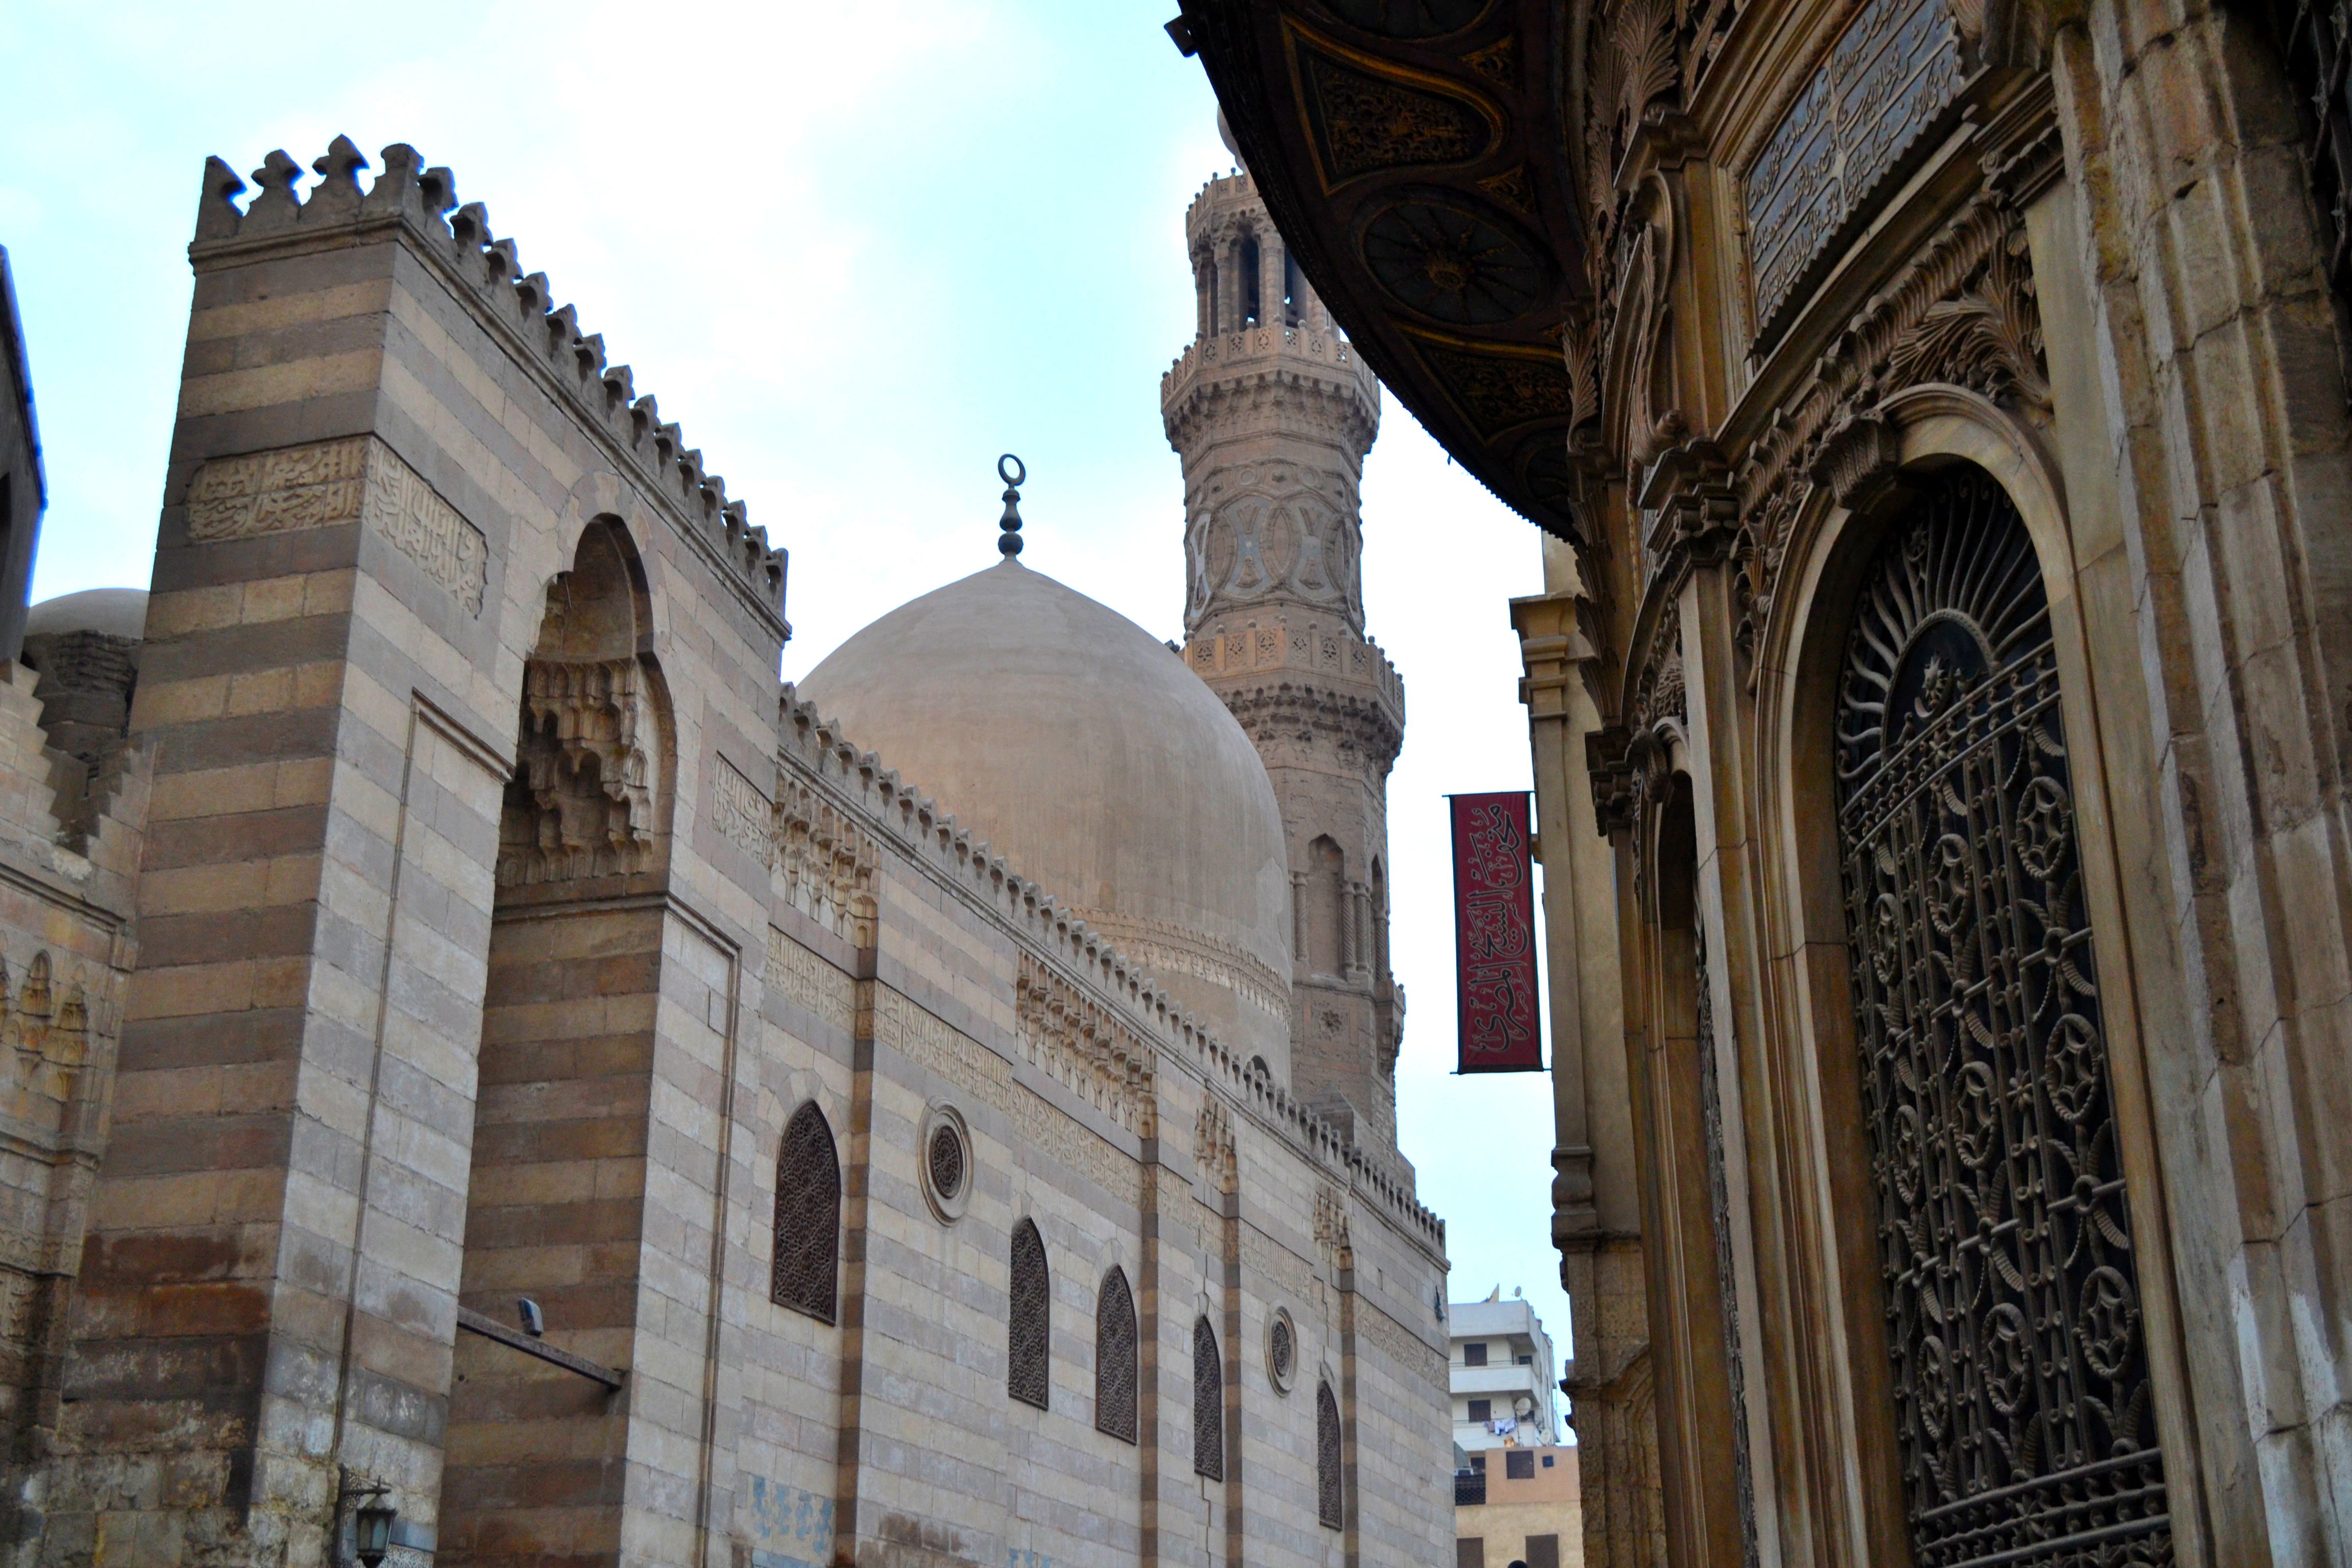 This ottoman period mosque is located across the 14th-century madrasa